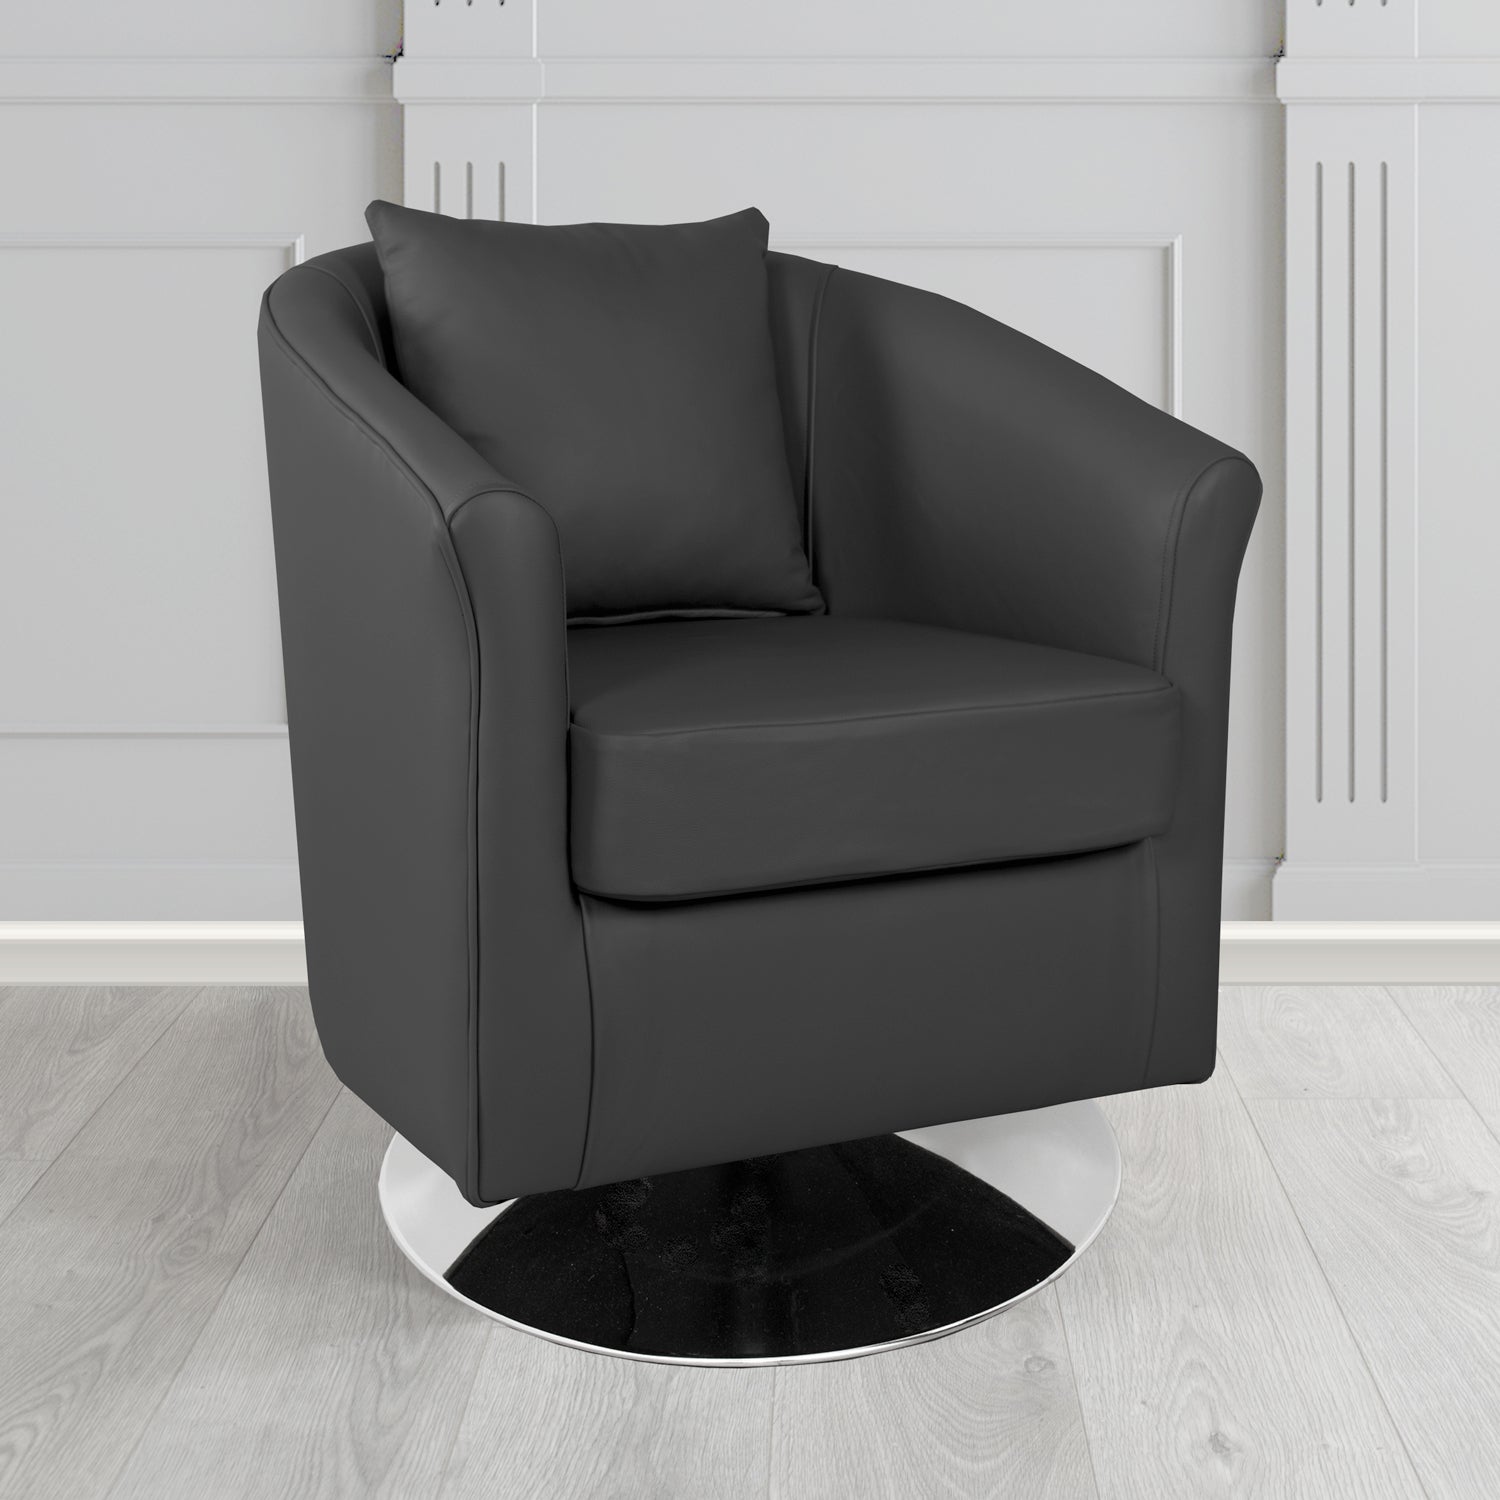 St Tropez Swivel Tub Chair in Contempo Black Crib 5 Genuine Leather with Scatter Cushion